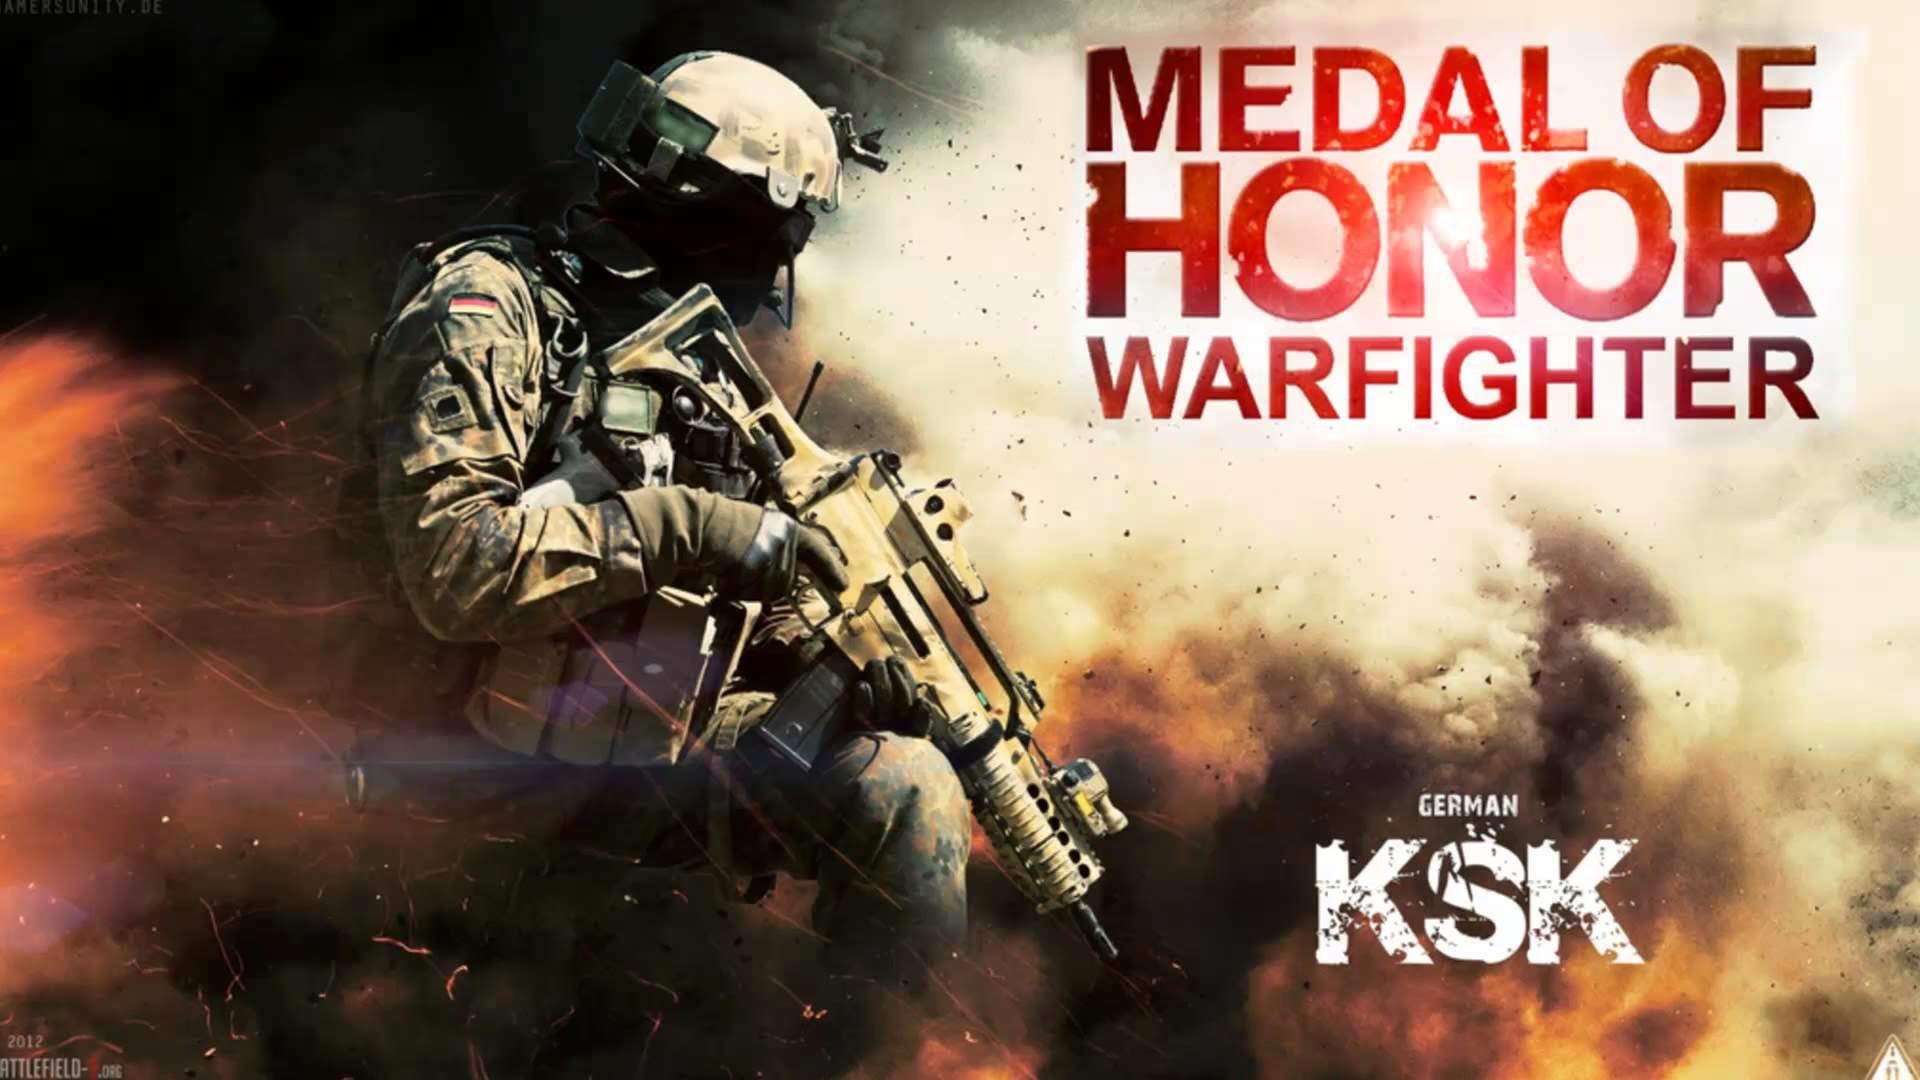 1920x1080 - Medal Of Honor Warfighter | M.O.H | Pinterest | Fps games, Gaming and  Video games